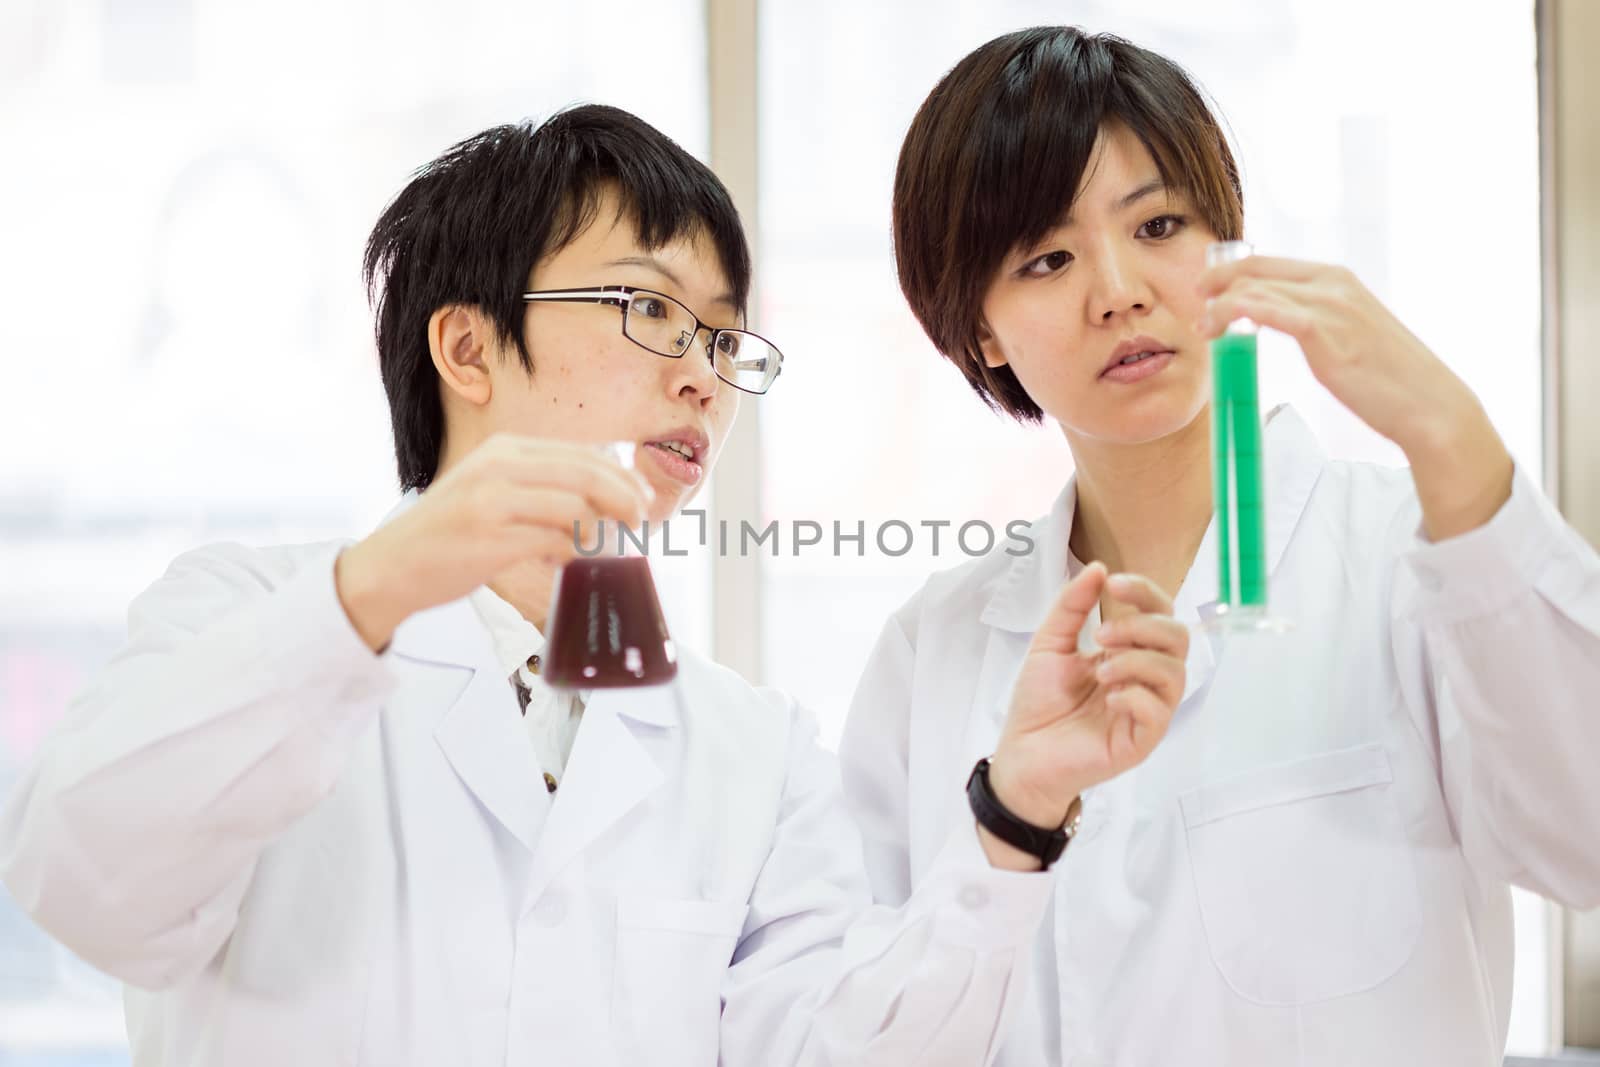 Female Chinese scientists in a laboratory inspecting chemicals